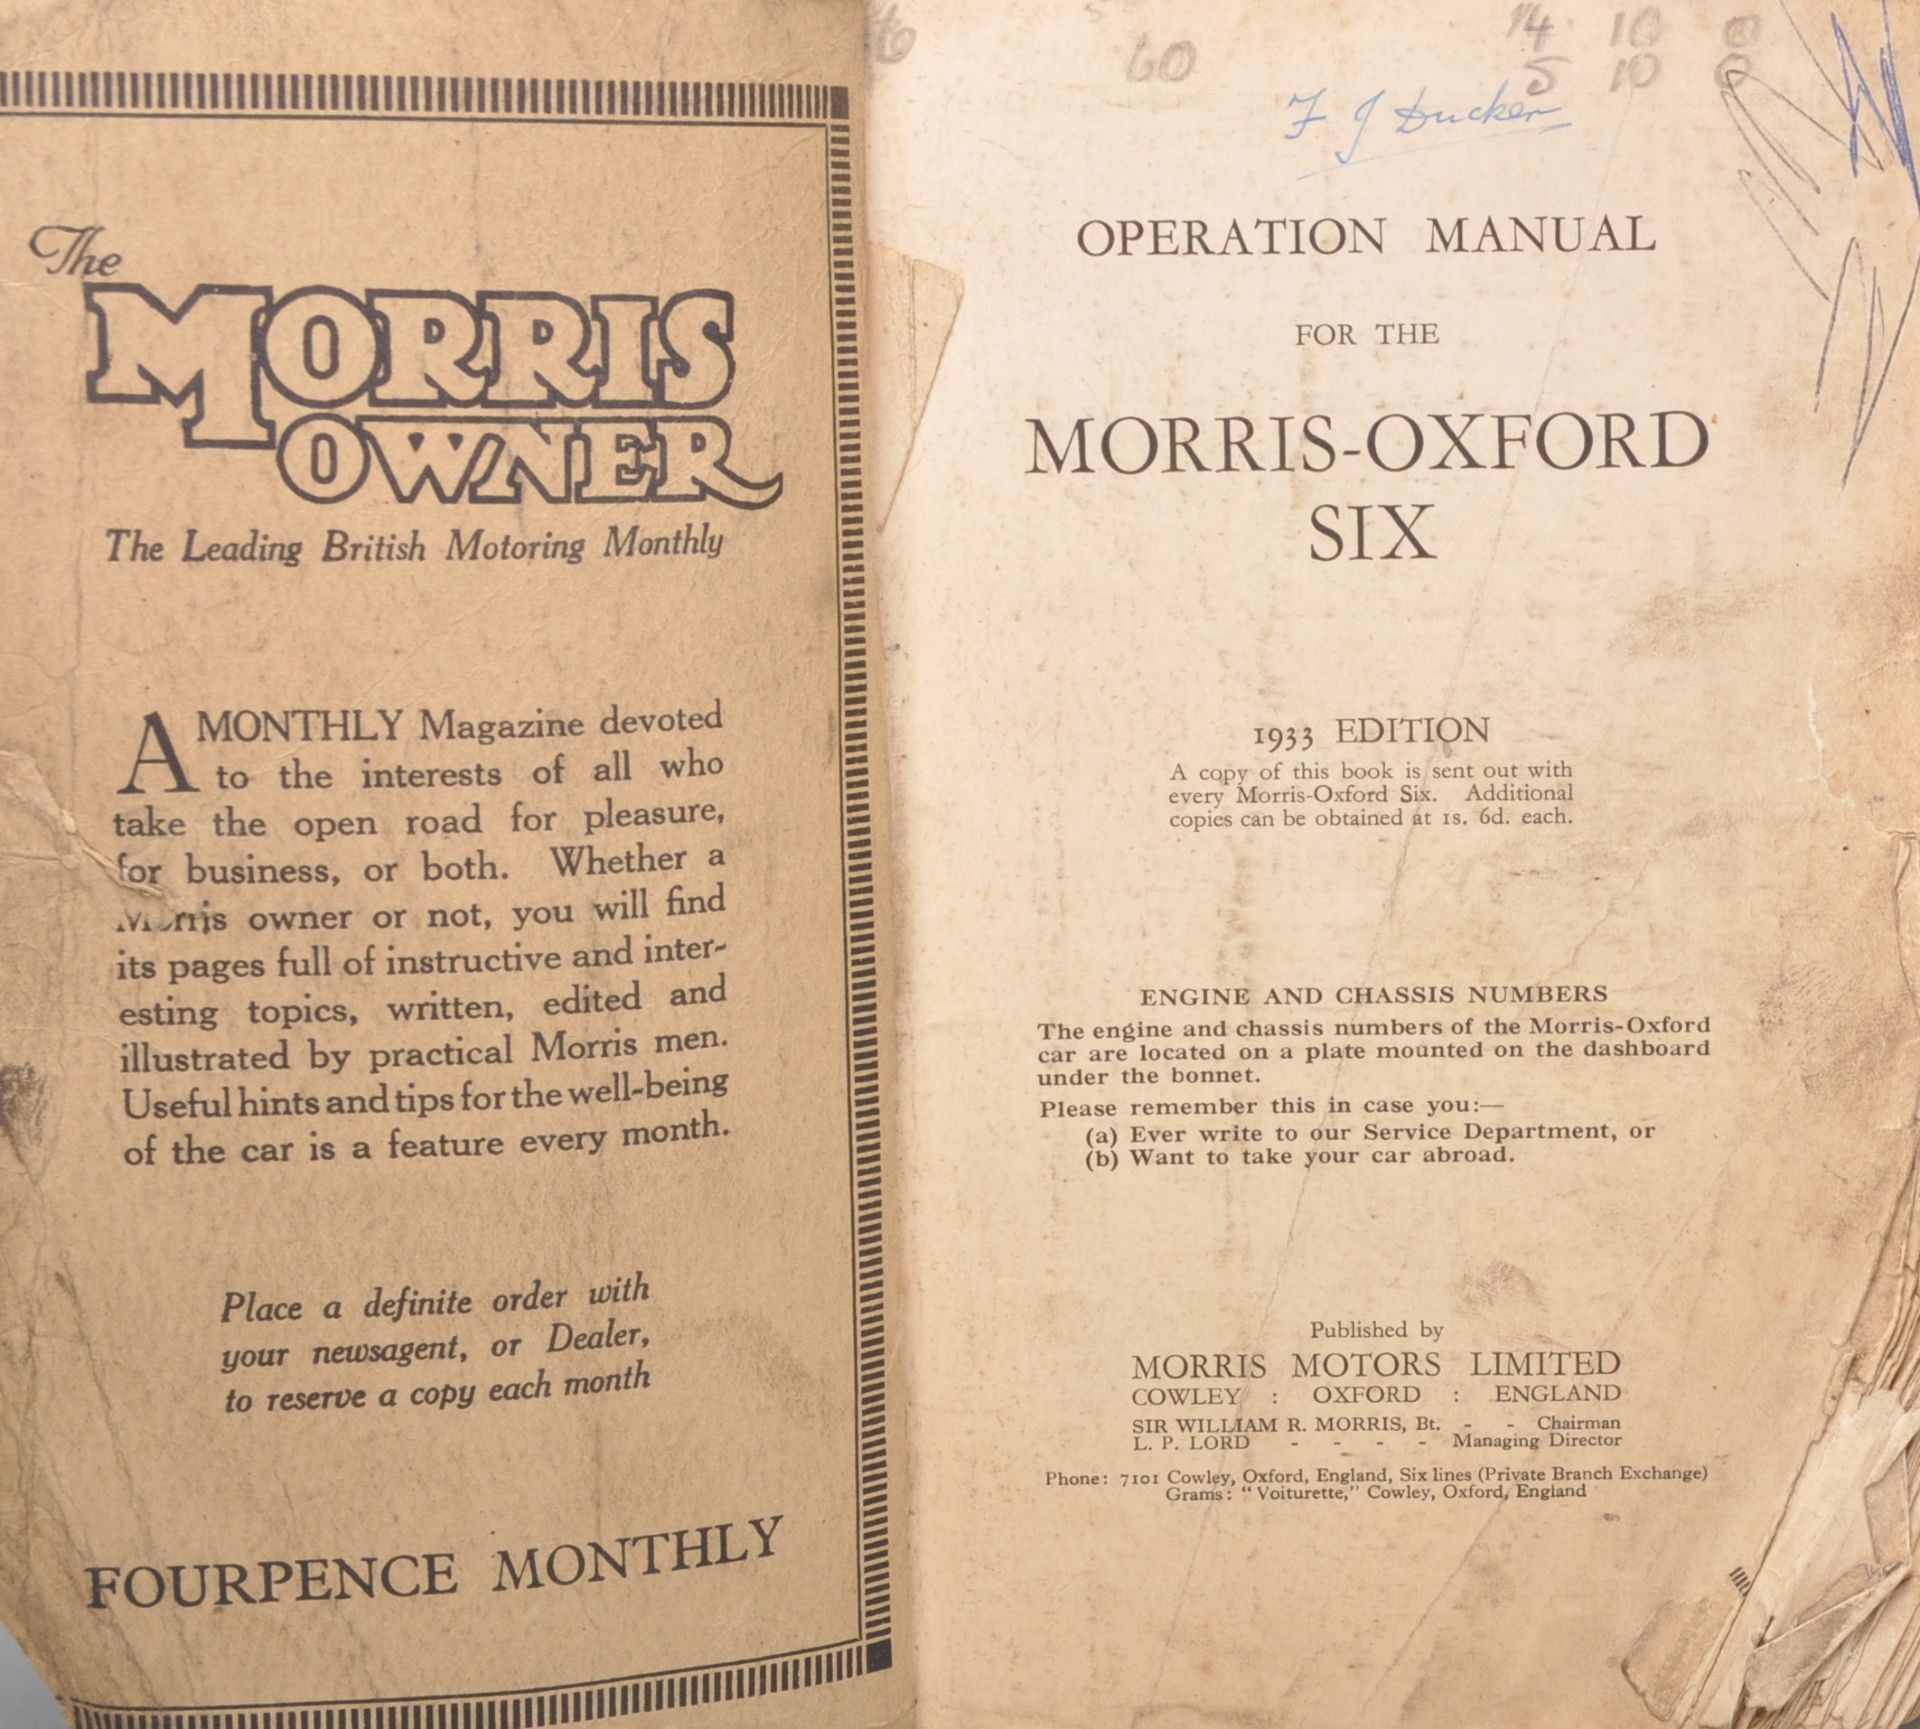 Motoring - A Operation Manual for a Morris-Oxford Six. 1933 edition. - Bild 2 aus 4